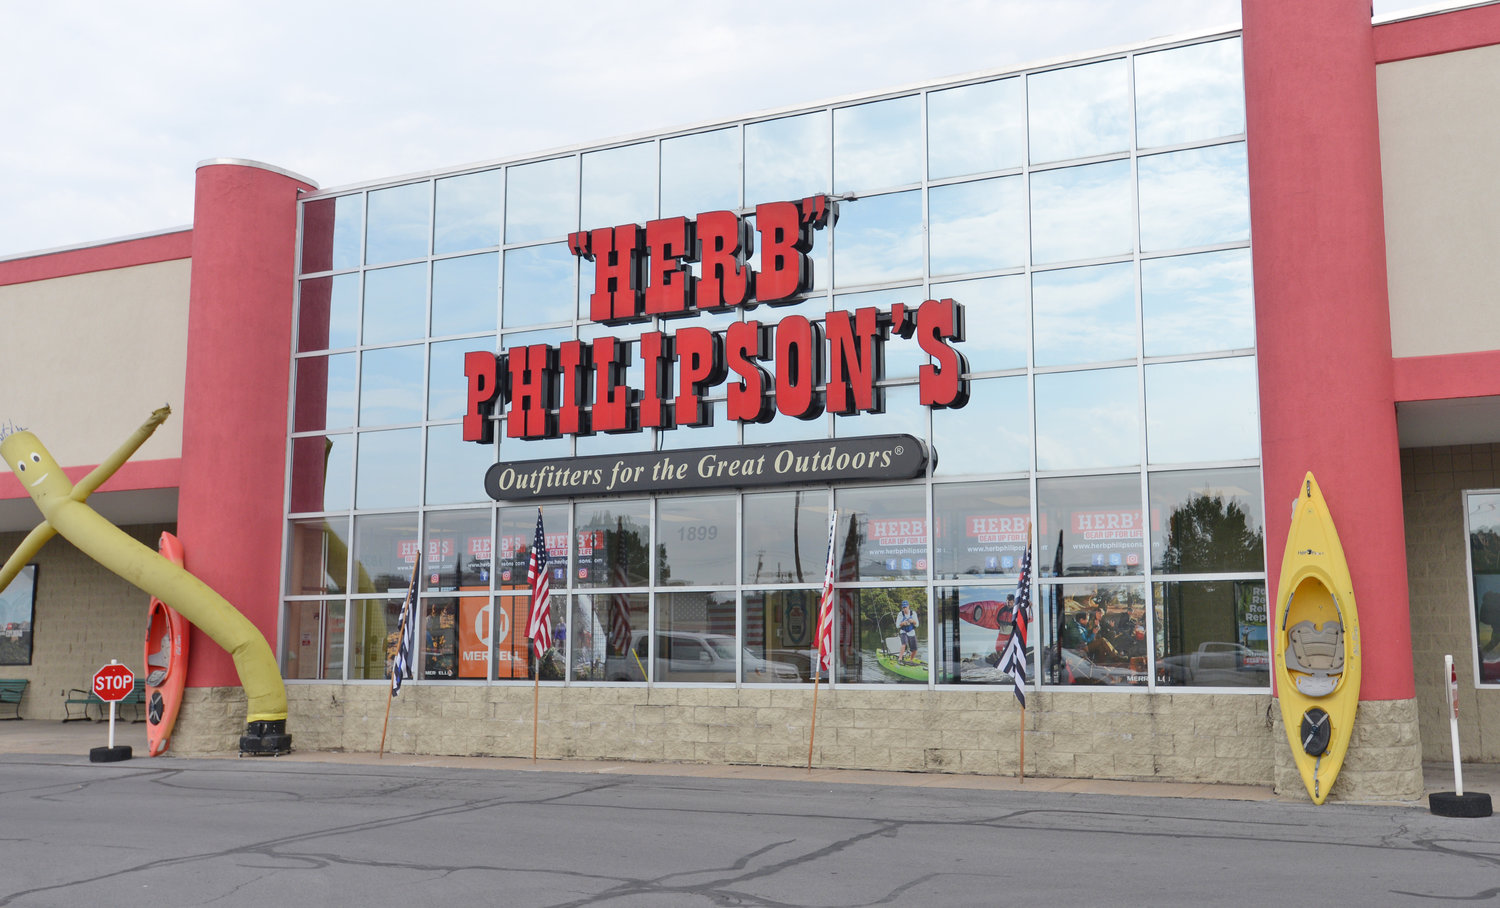 FOR SALE — Sporting goods retailer Herb Philipson’s will auction off its assets, including its six stores, inventory and branding, as part of a deal reached in its Chapter 11 bankruptcy proceedings, according to court documents filed Wednesday. Owner Guy Viti said the move is an attempt to keep the company operating and in the area.